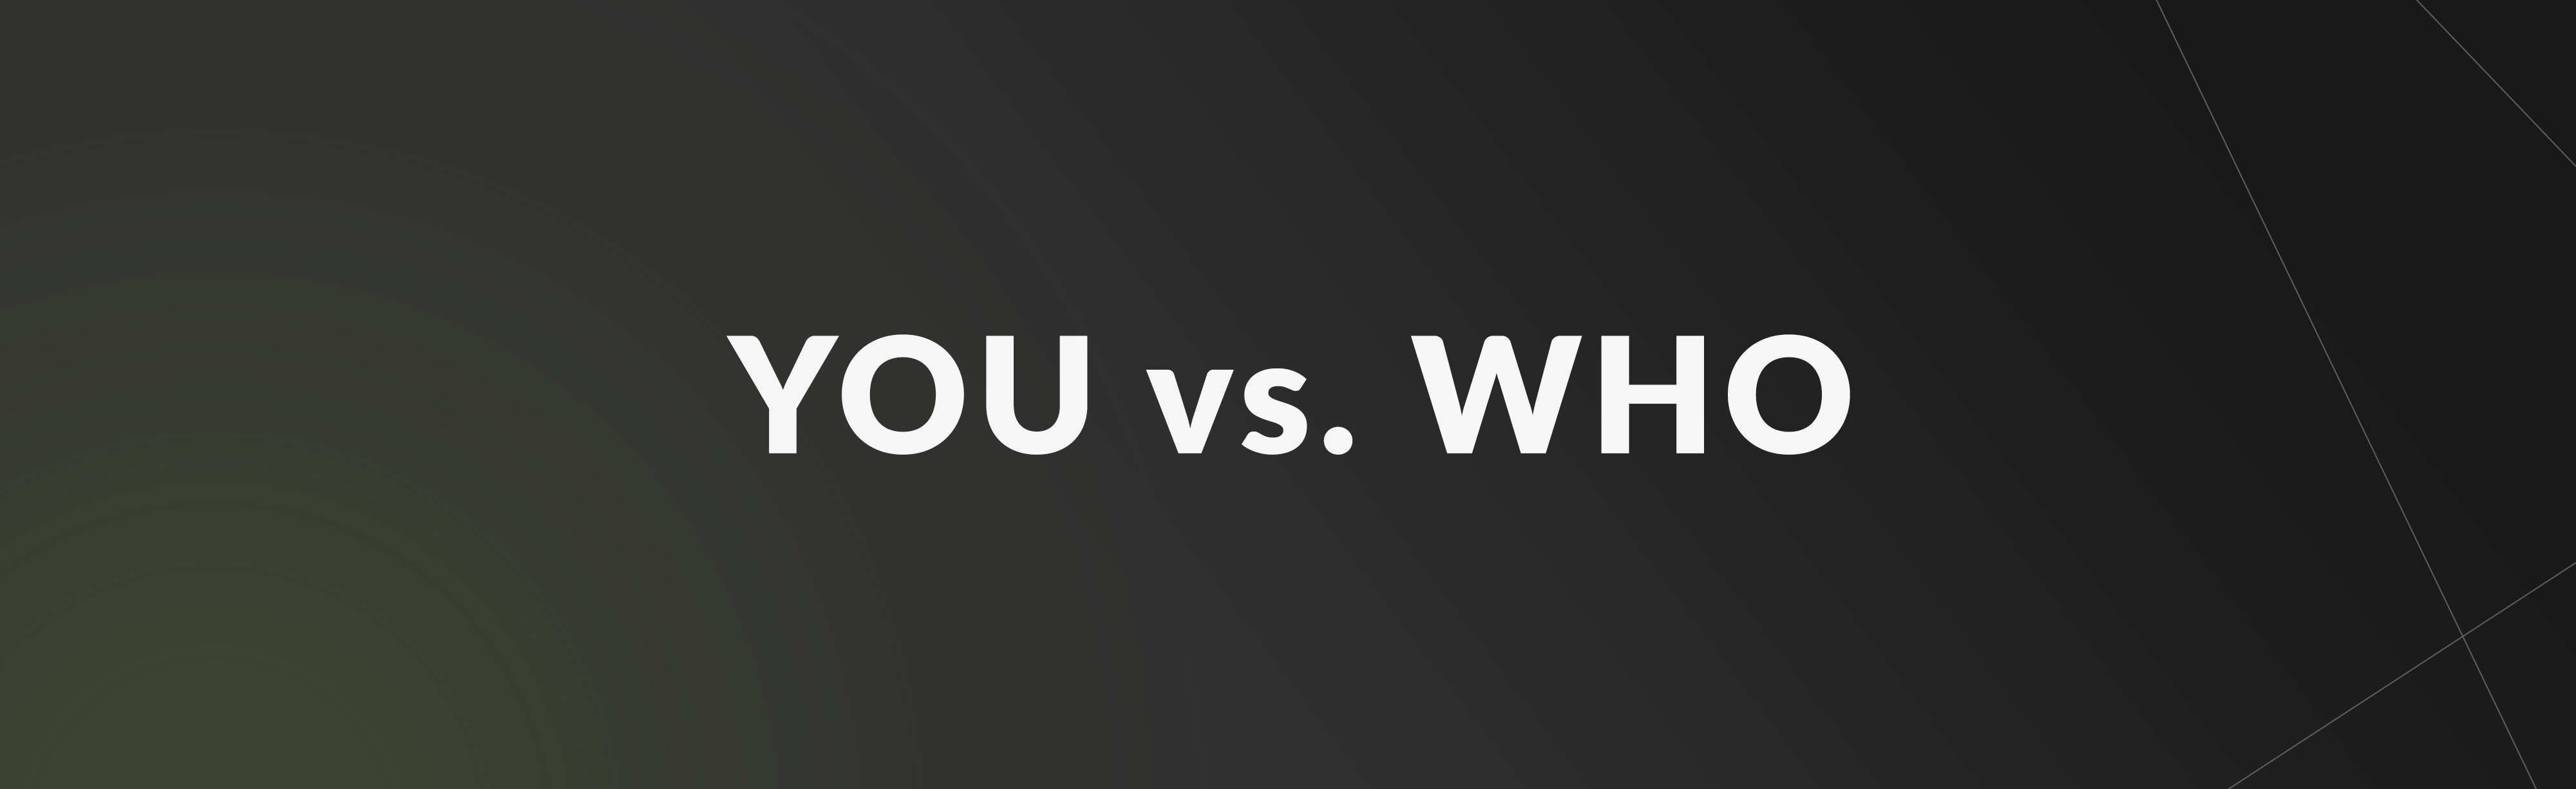 youvswho.png